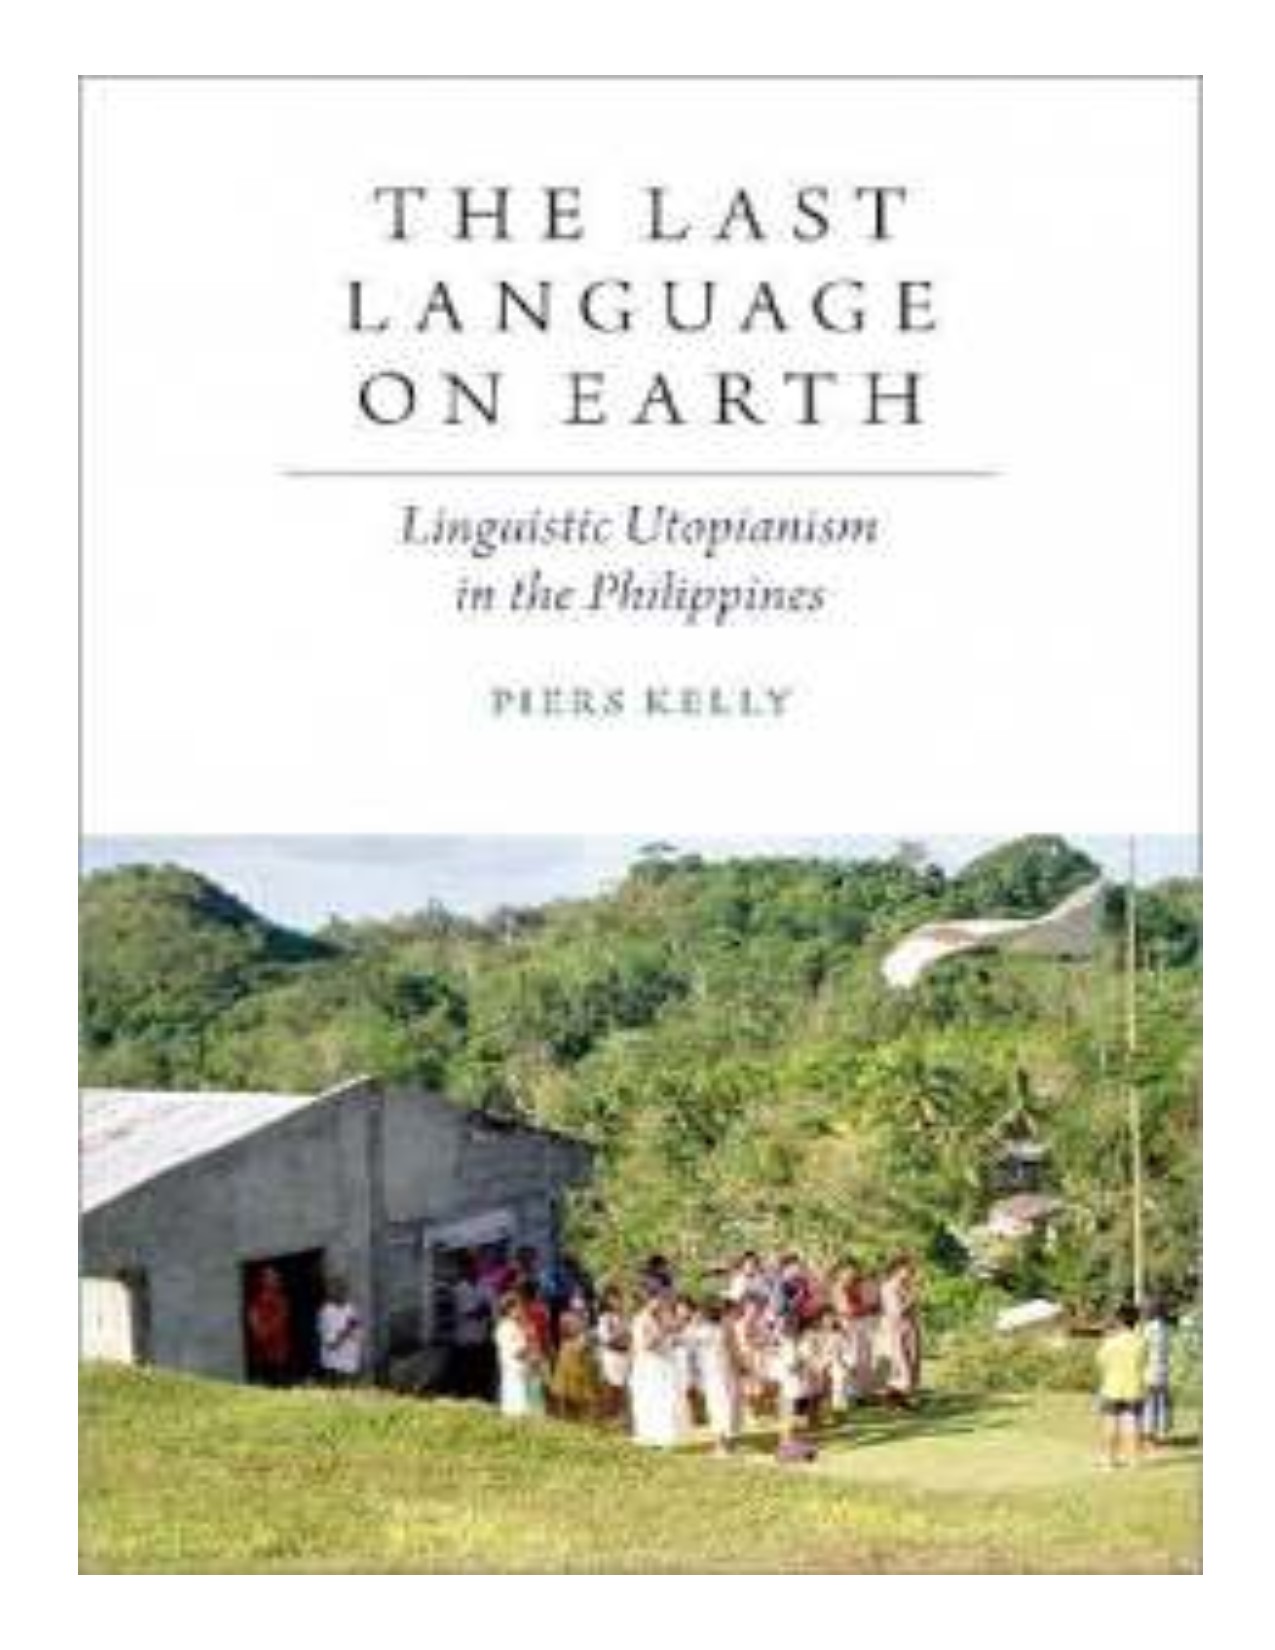 The last language on Earth linguistic utopianism in the Philippines